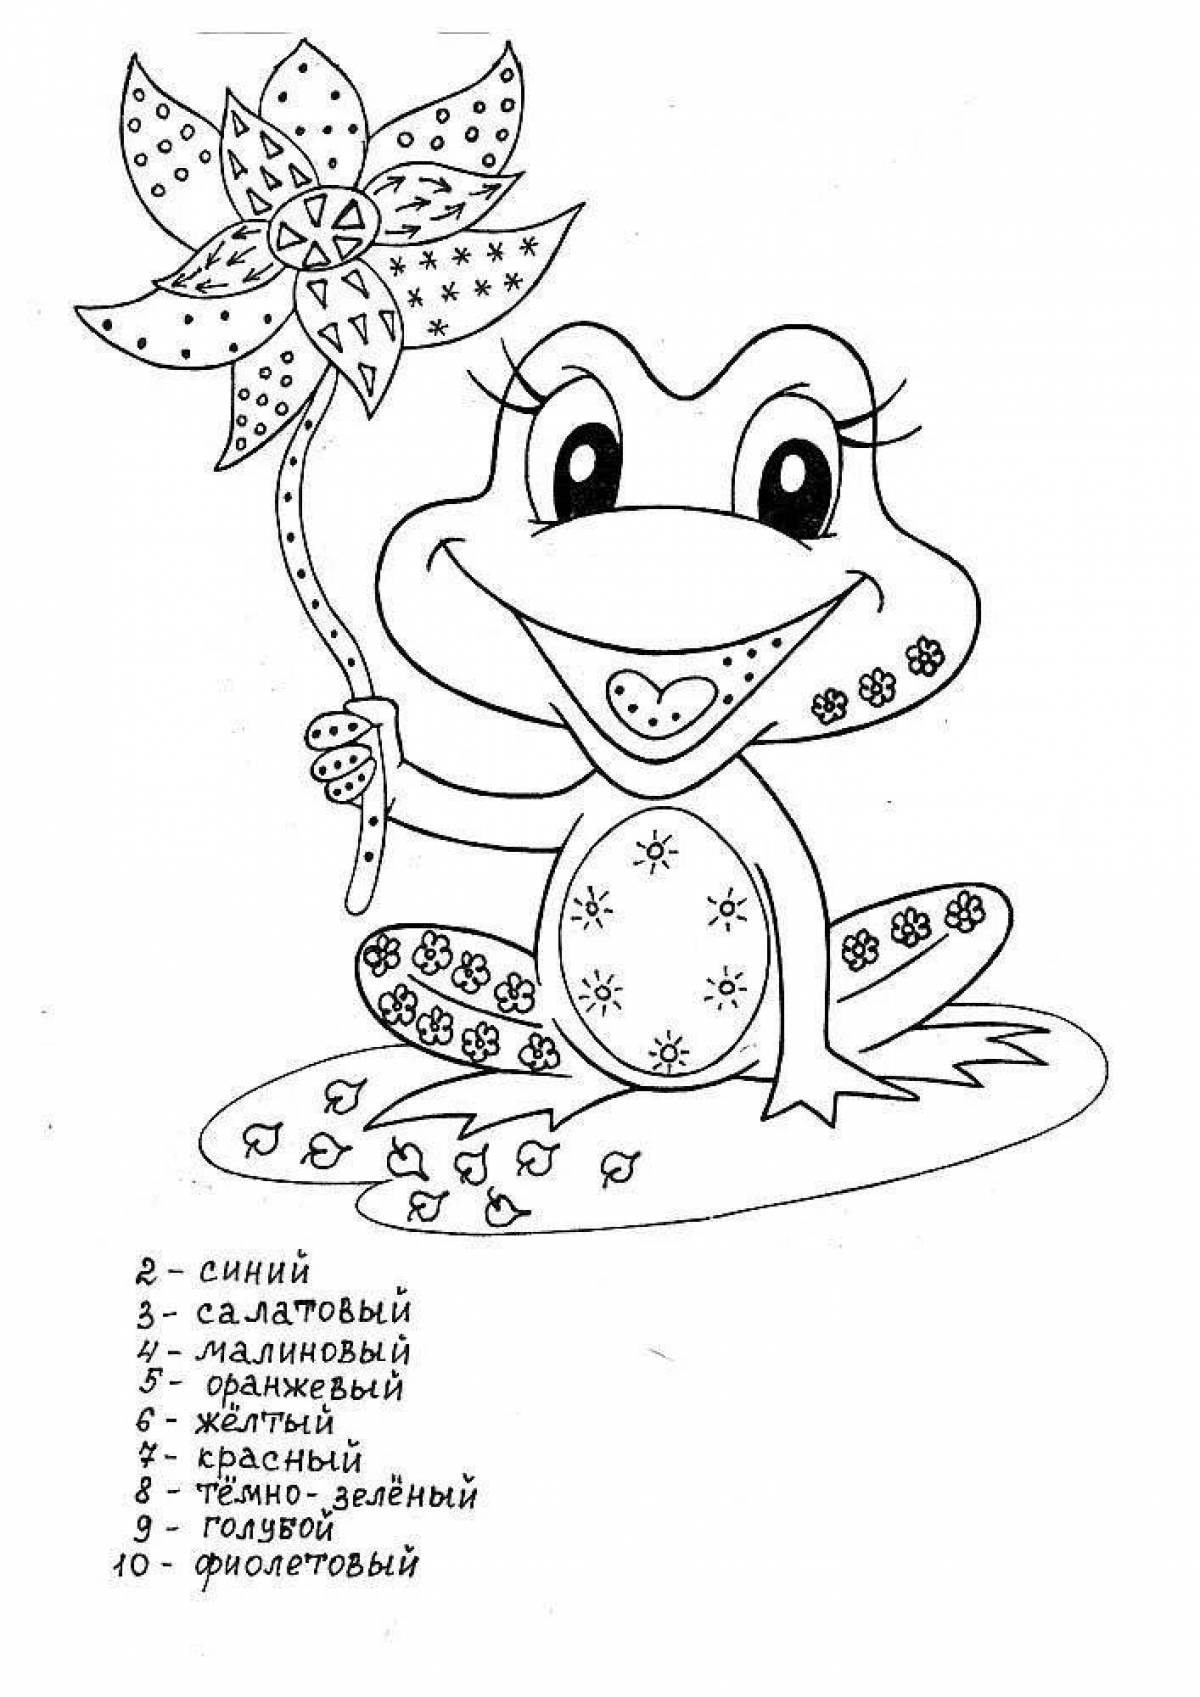 Colorful coloring book for grade 2